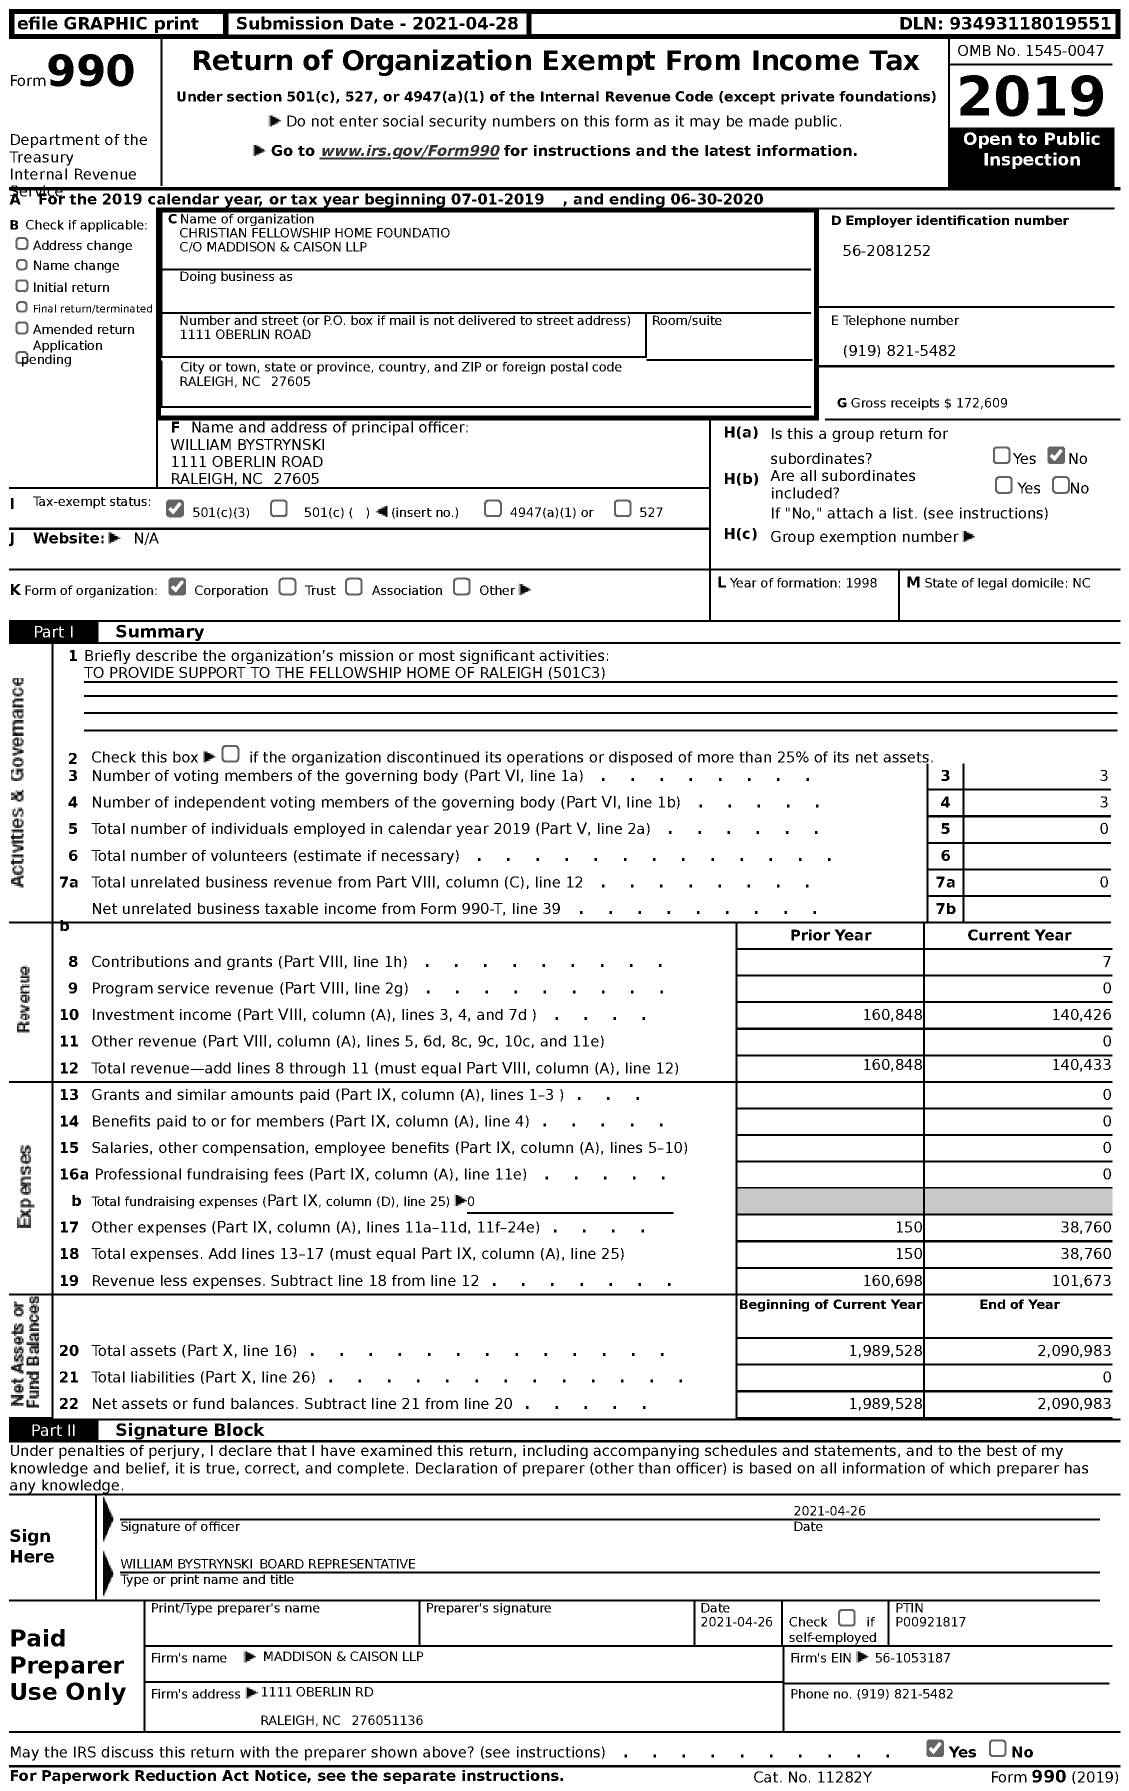 Image of first page of 2019 Form 990 for Christian Fellowship Home Foundation